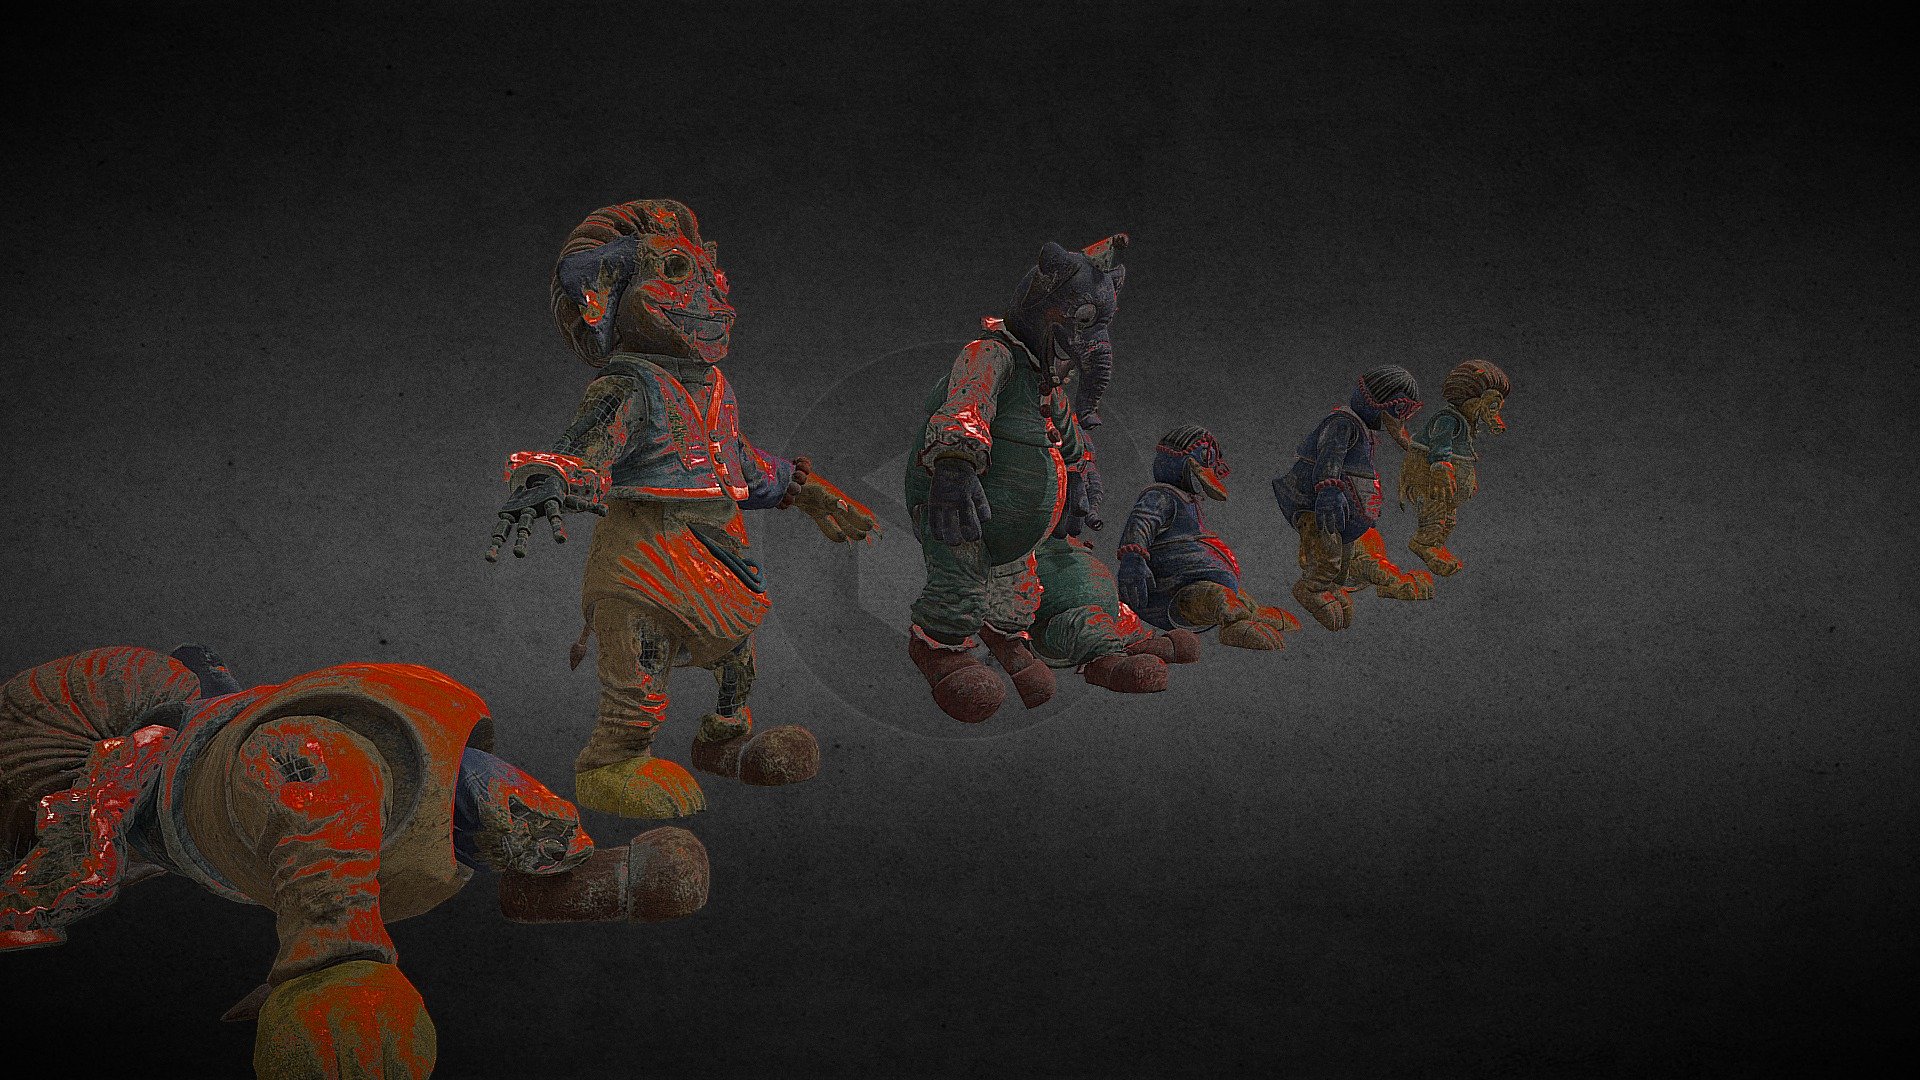 Mascots (ALL of them) fnaf ruin - Download Free 3D model by jakss